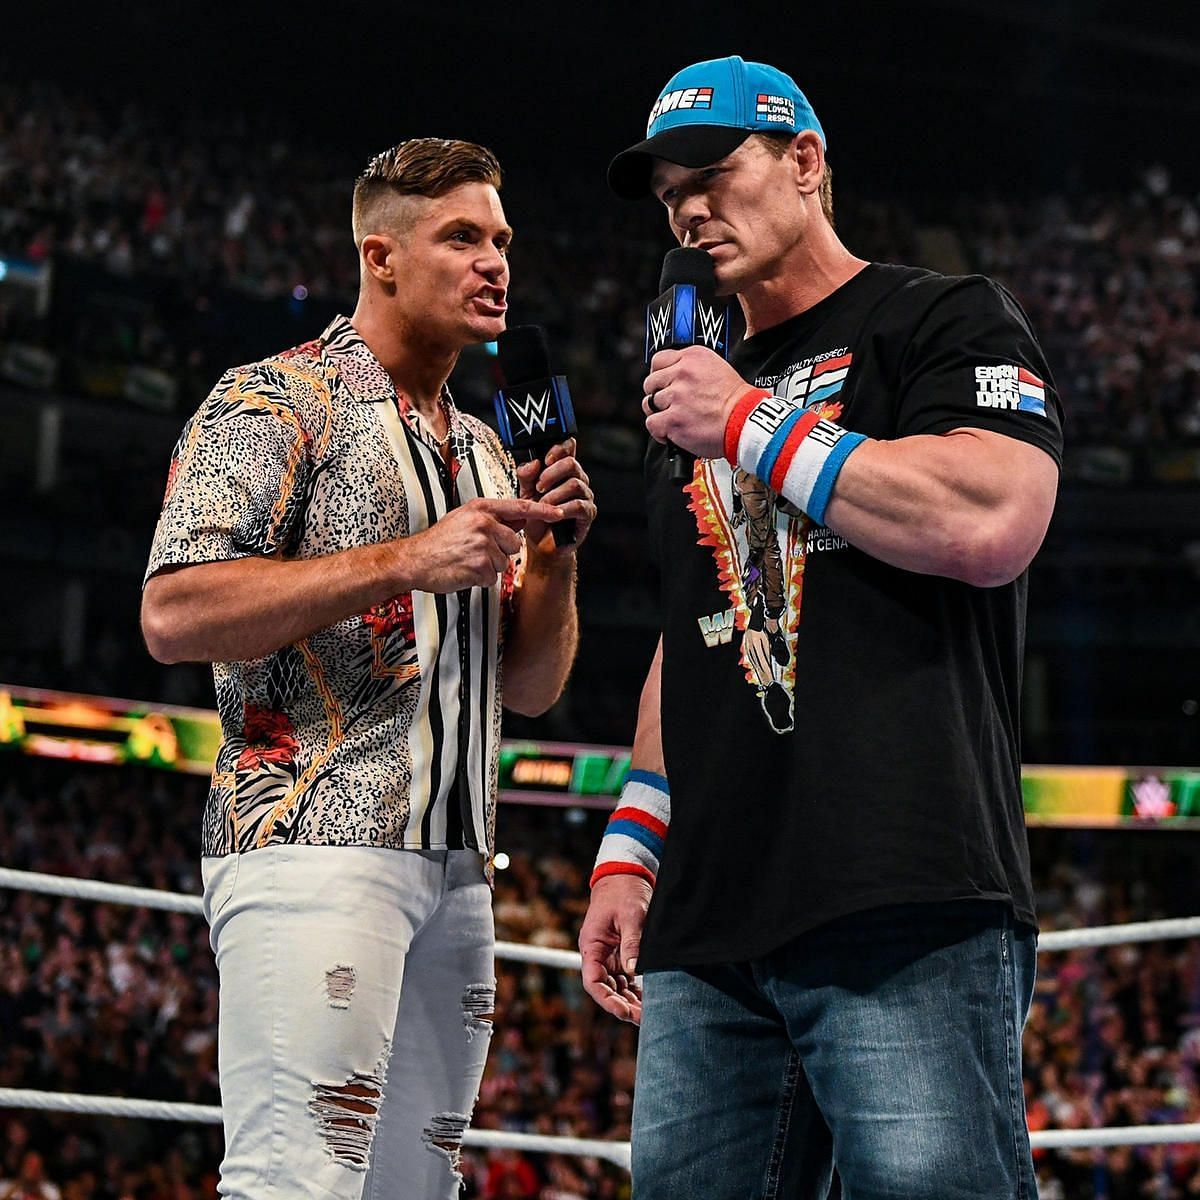 Another battle of words could be in the cards for Cena&#039;s return to SmackDown.